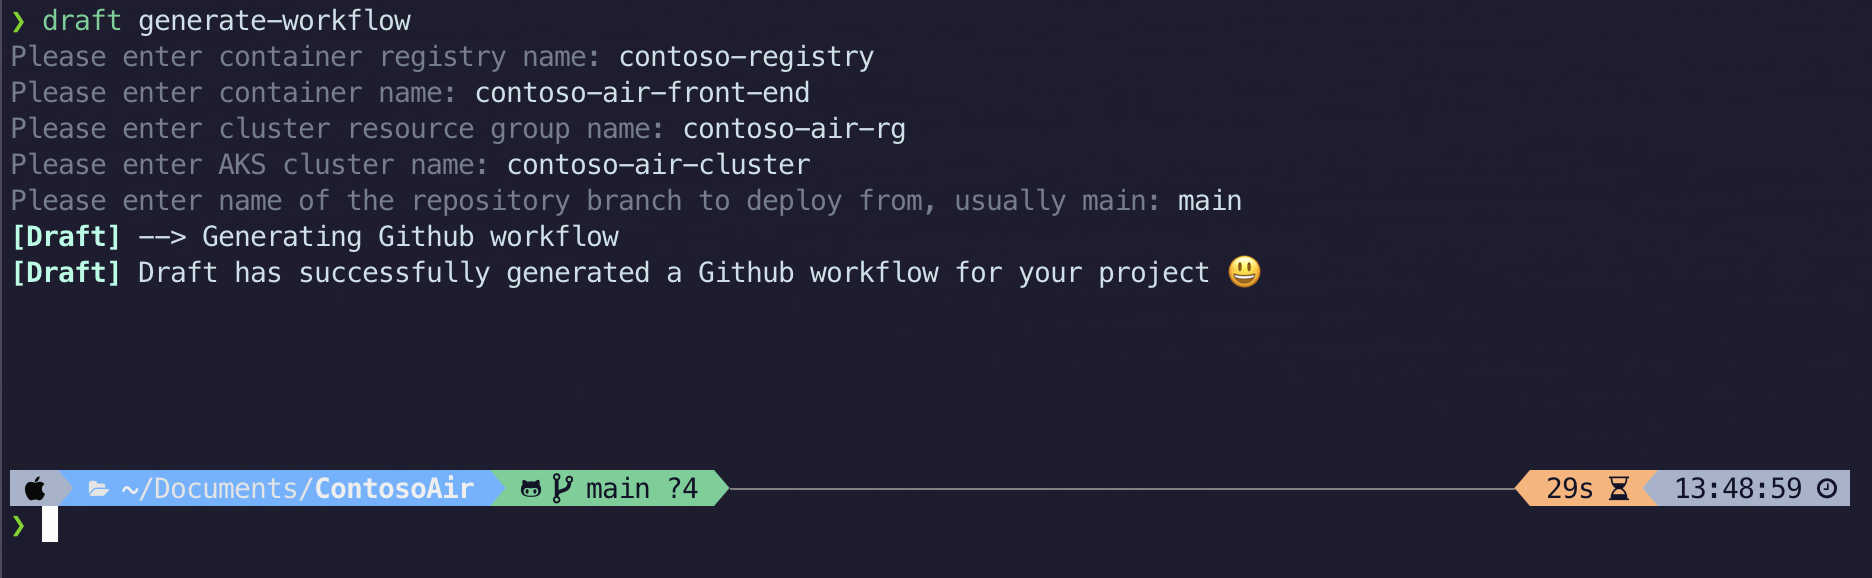 screenshot of command line executing "draft generate-workflow" printing "Draft has successfully genereated a Github workflow for your project"